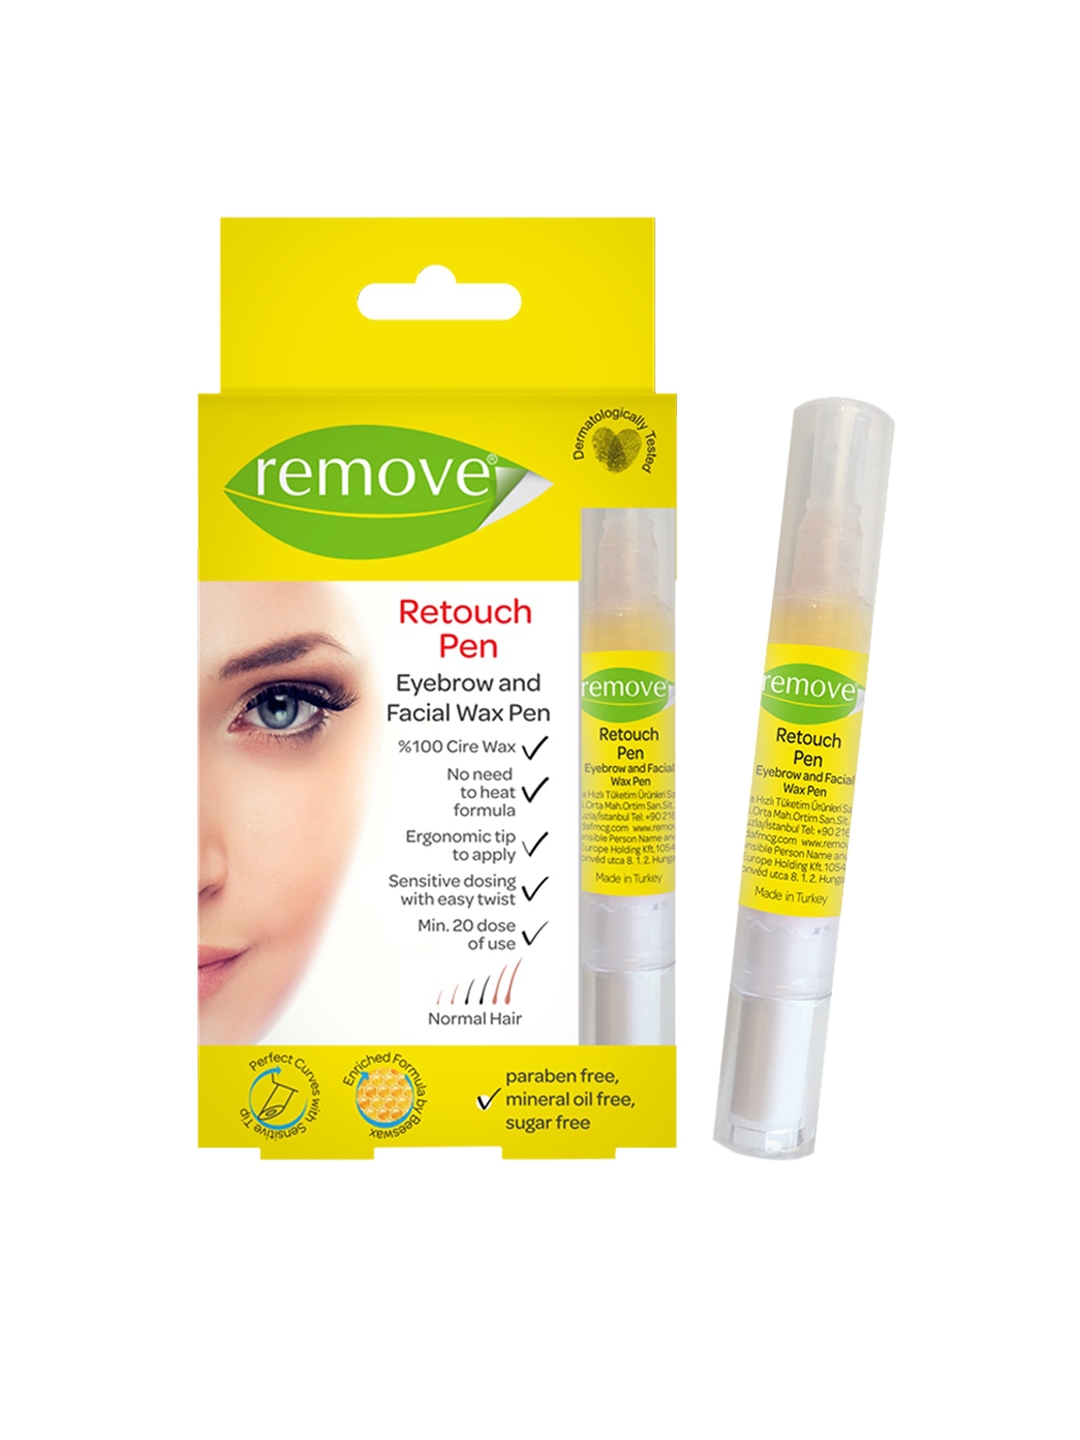 Buy Remove Retouch Eyebrow And Facial Wax Pen Body Wax And Essentials For Women 4446566 Myntra 